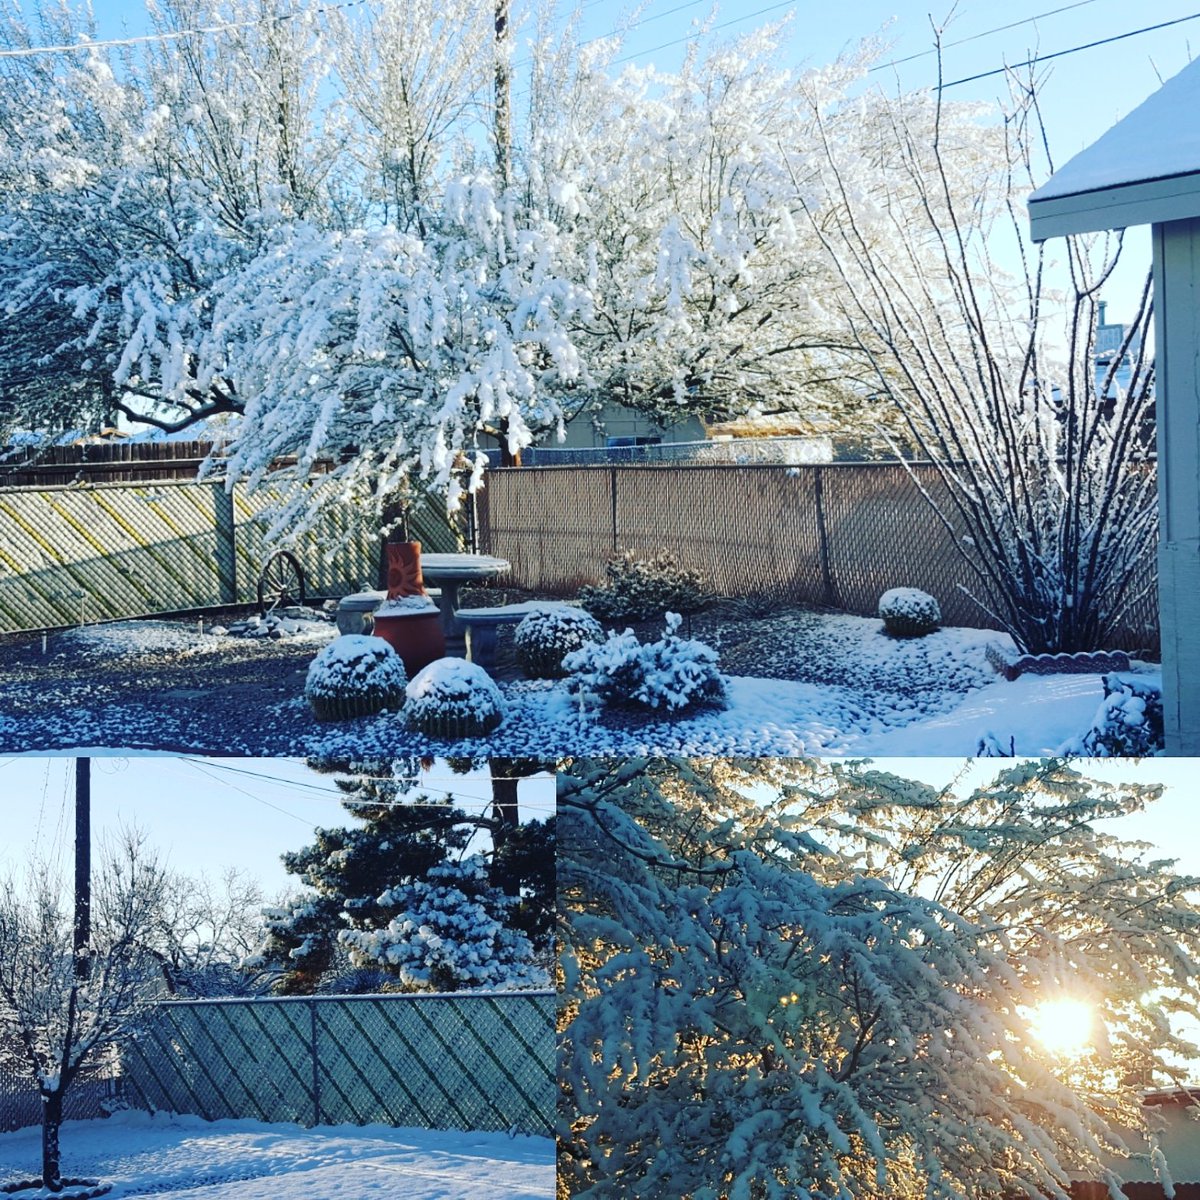 There is something so pretty about snow on tree branches. Yesterday was weird, but the sun is out and blue skies are back. Snow won't stay long, but it was pretty. #arizonaauthor #authorlife #snowinarizona #bjkurtz